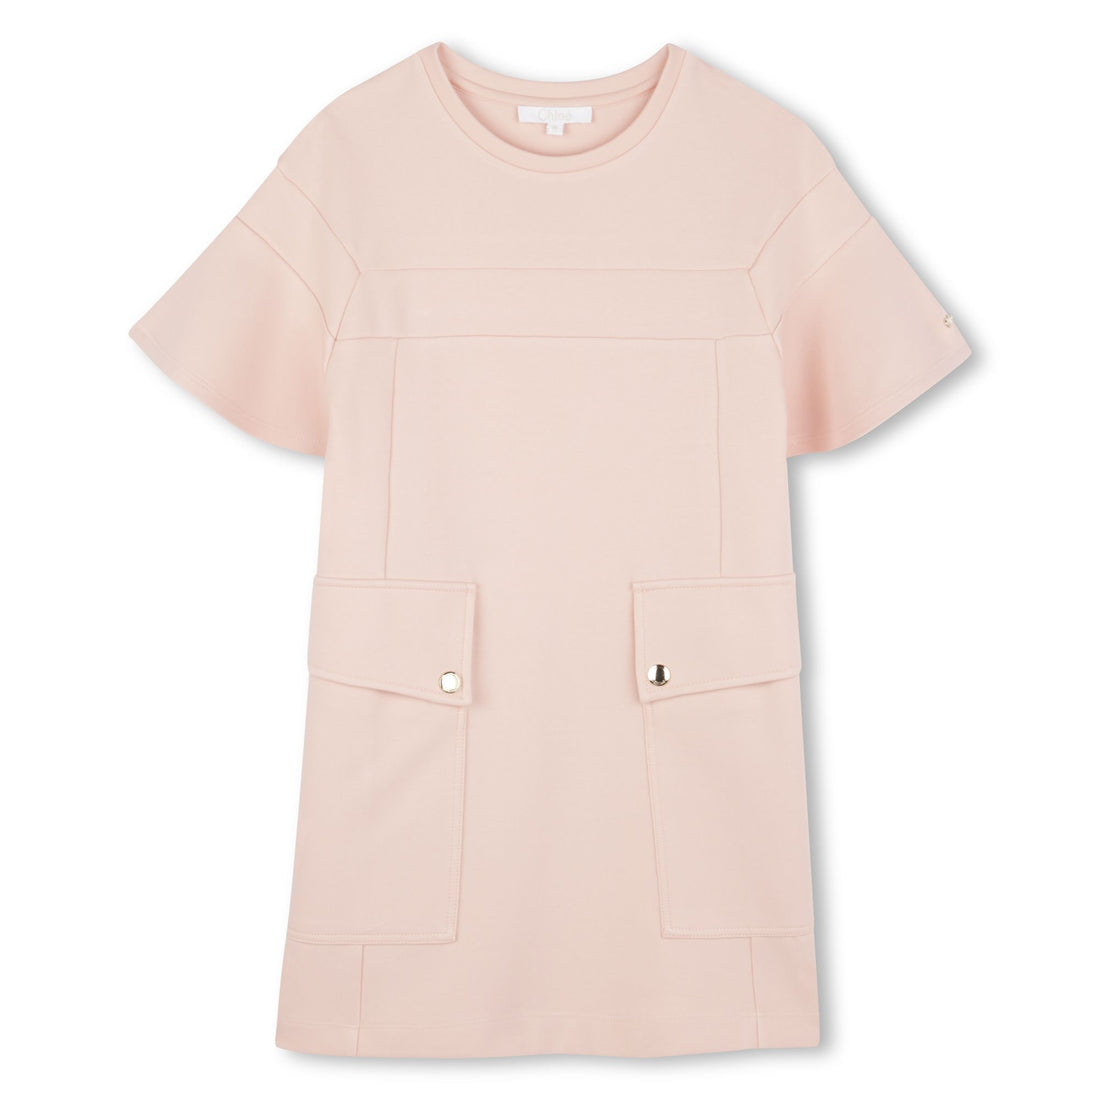 Chloe Dress Pink - Elegant and Comfortable for Any Occasion | Schools Out